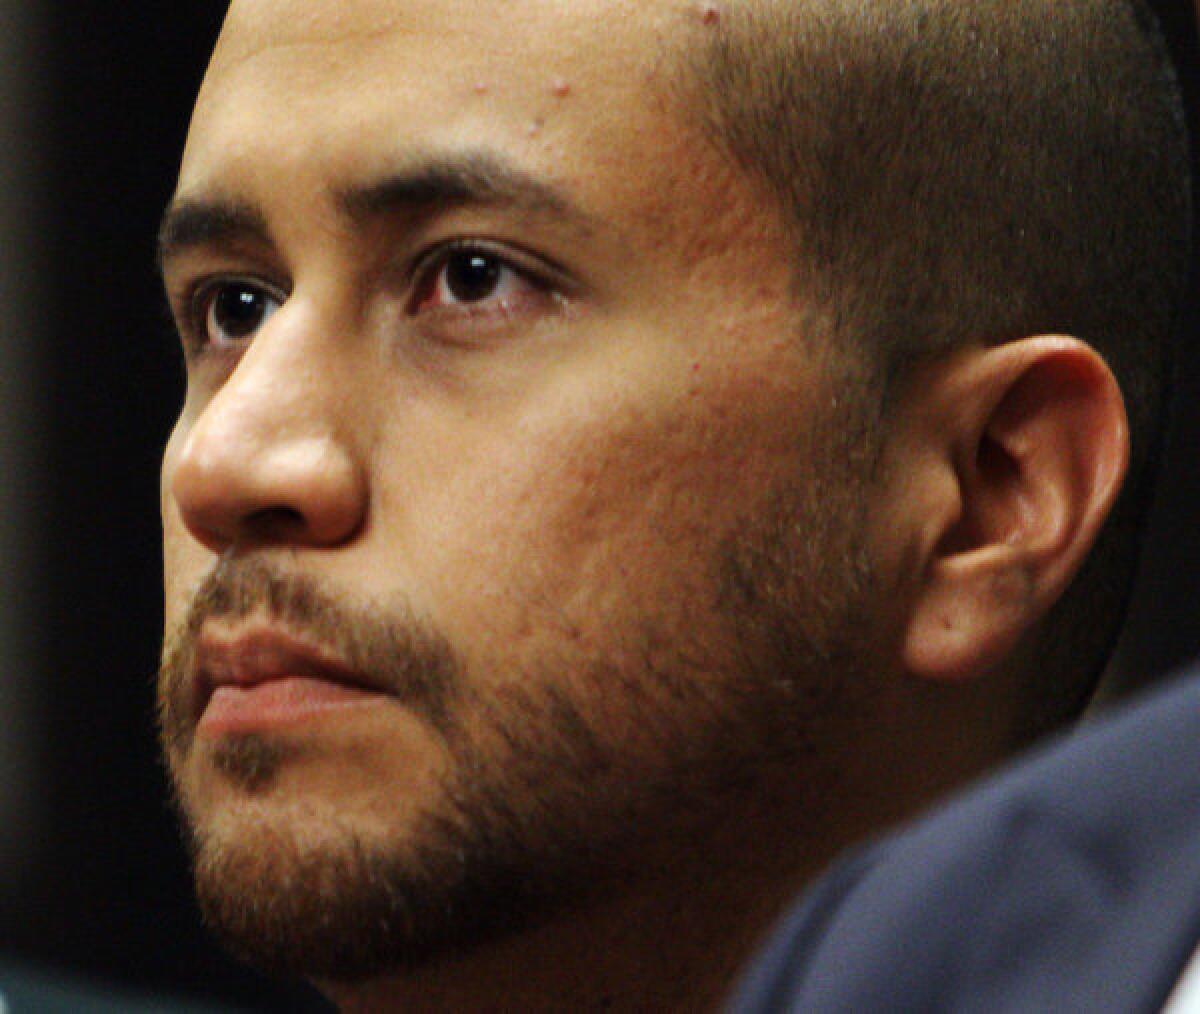 George Zimmerman, shown at a court hearing in Sanford, Fla., last year, is scheduled to go on trial June 10.